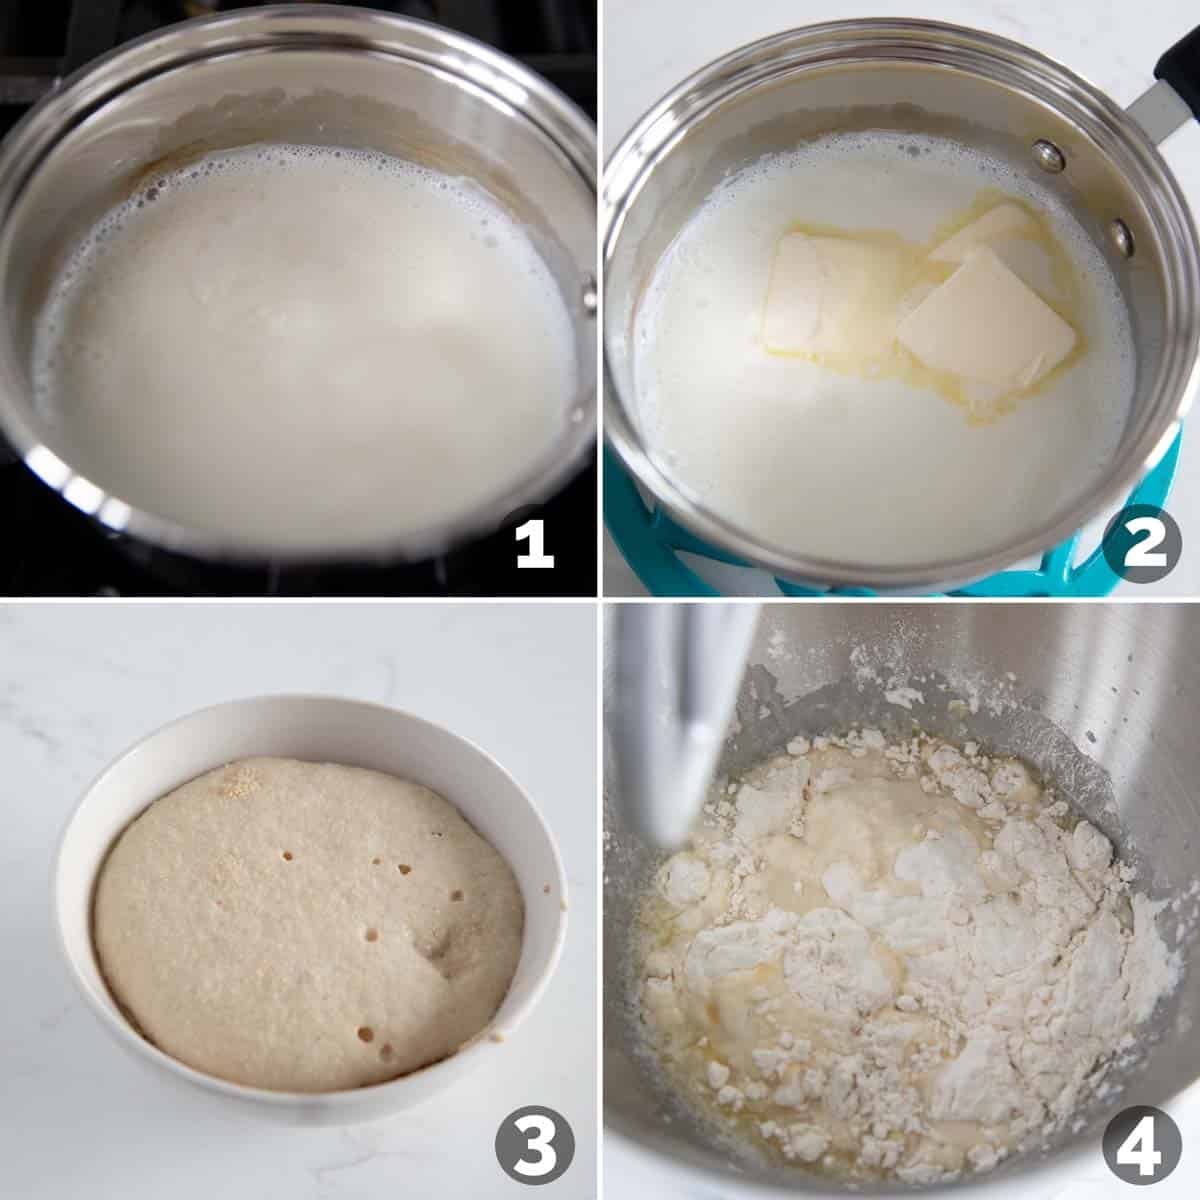 Steps showing how to start the dough for Texas Roadhouse rolls.